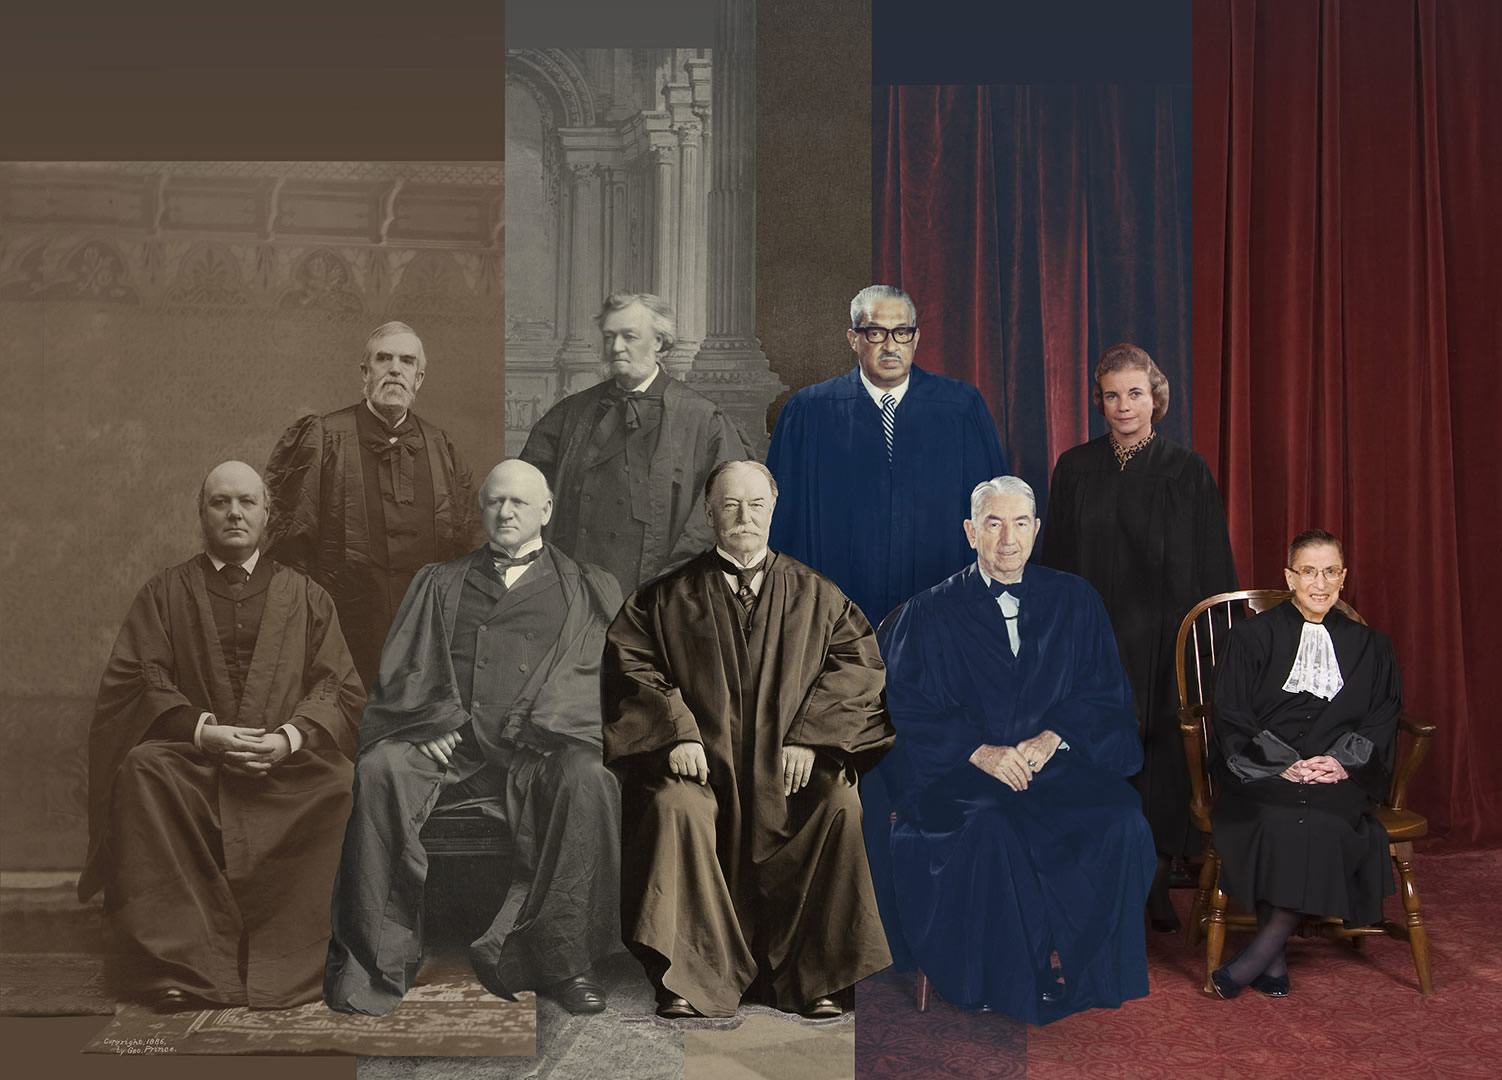 All Together for the Camera: A History of the Supreme Court #39 s Group